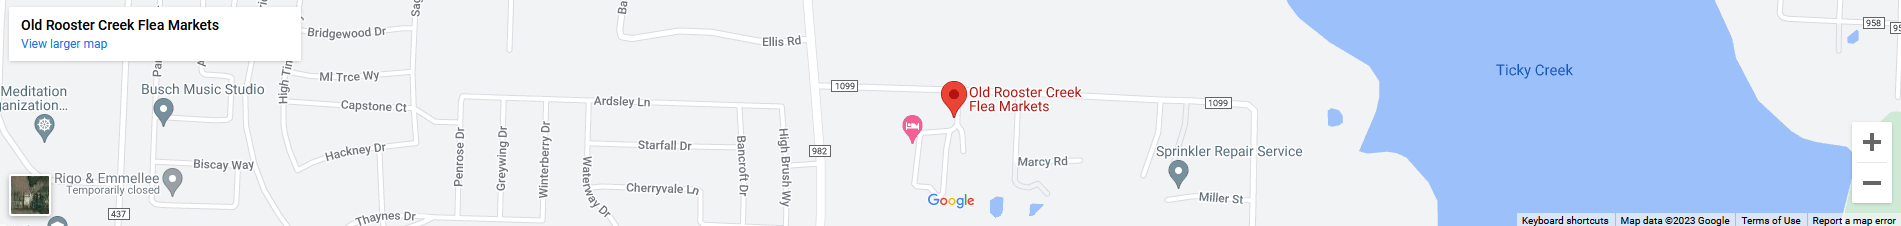 A map of old rooster creek flea market